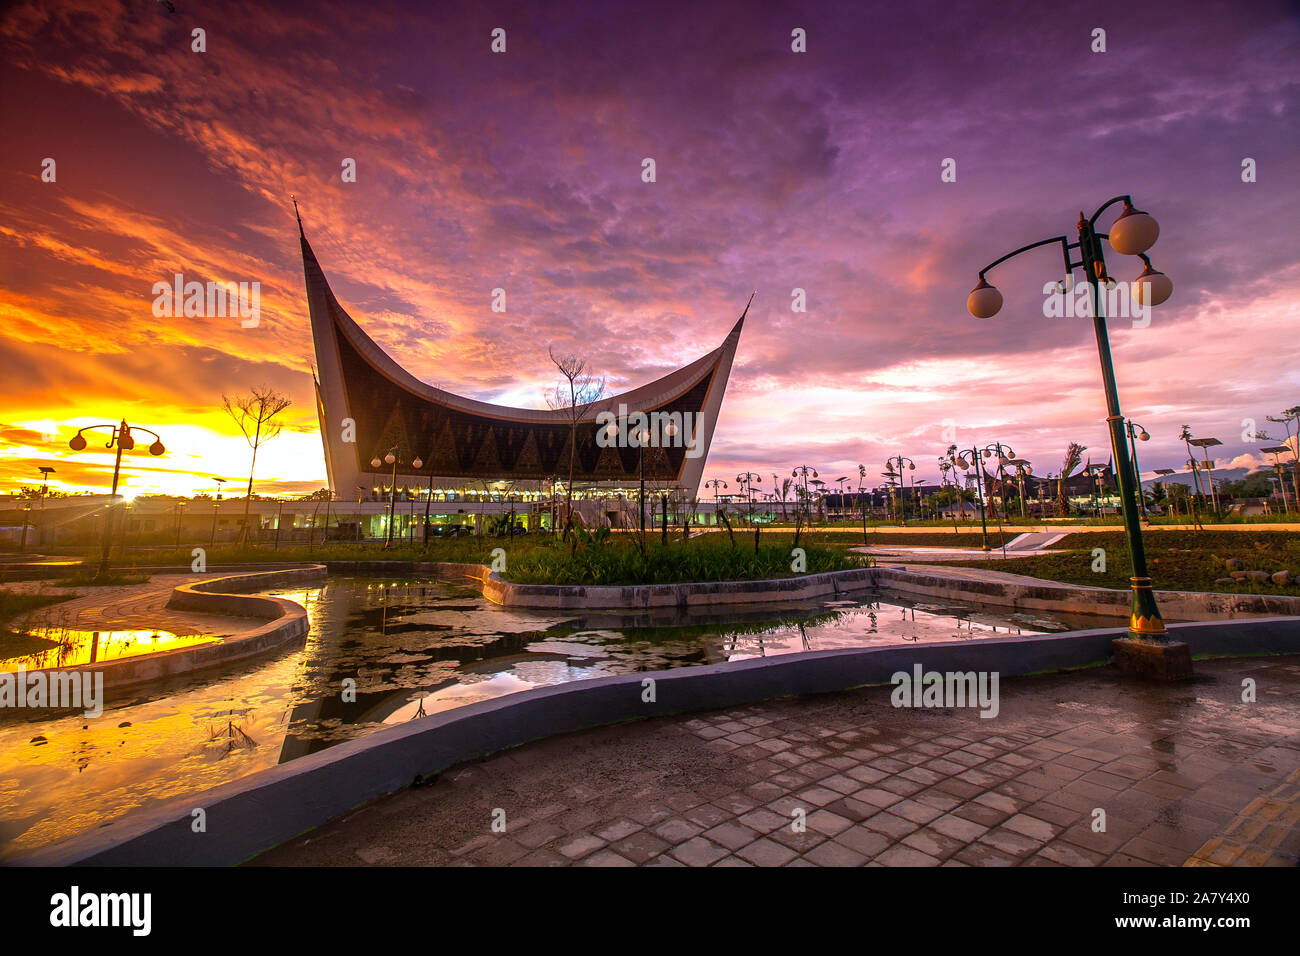 the beauty of the mosque with minangkabau cultural architecture and the beauty of the sunset Stock Photo